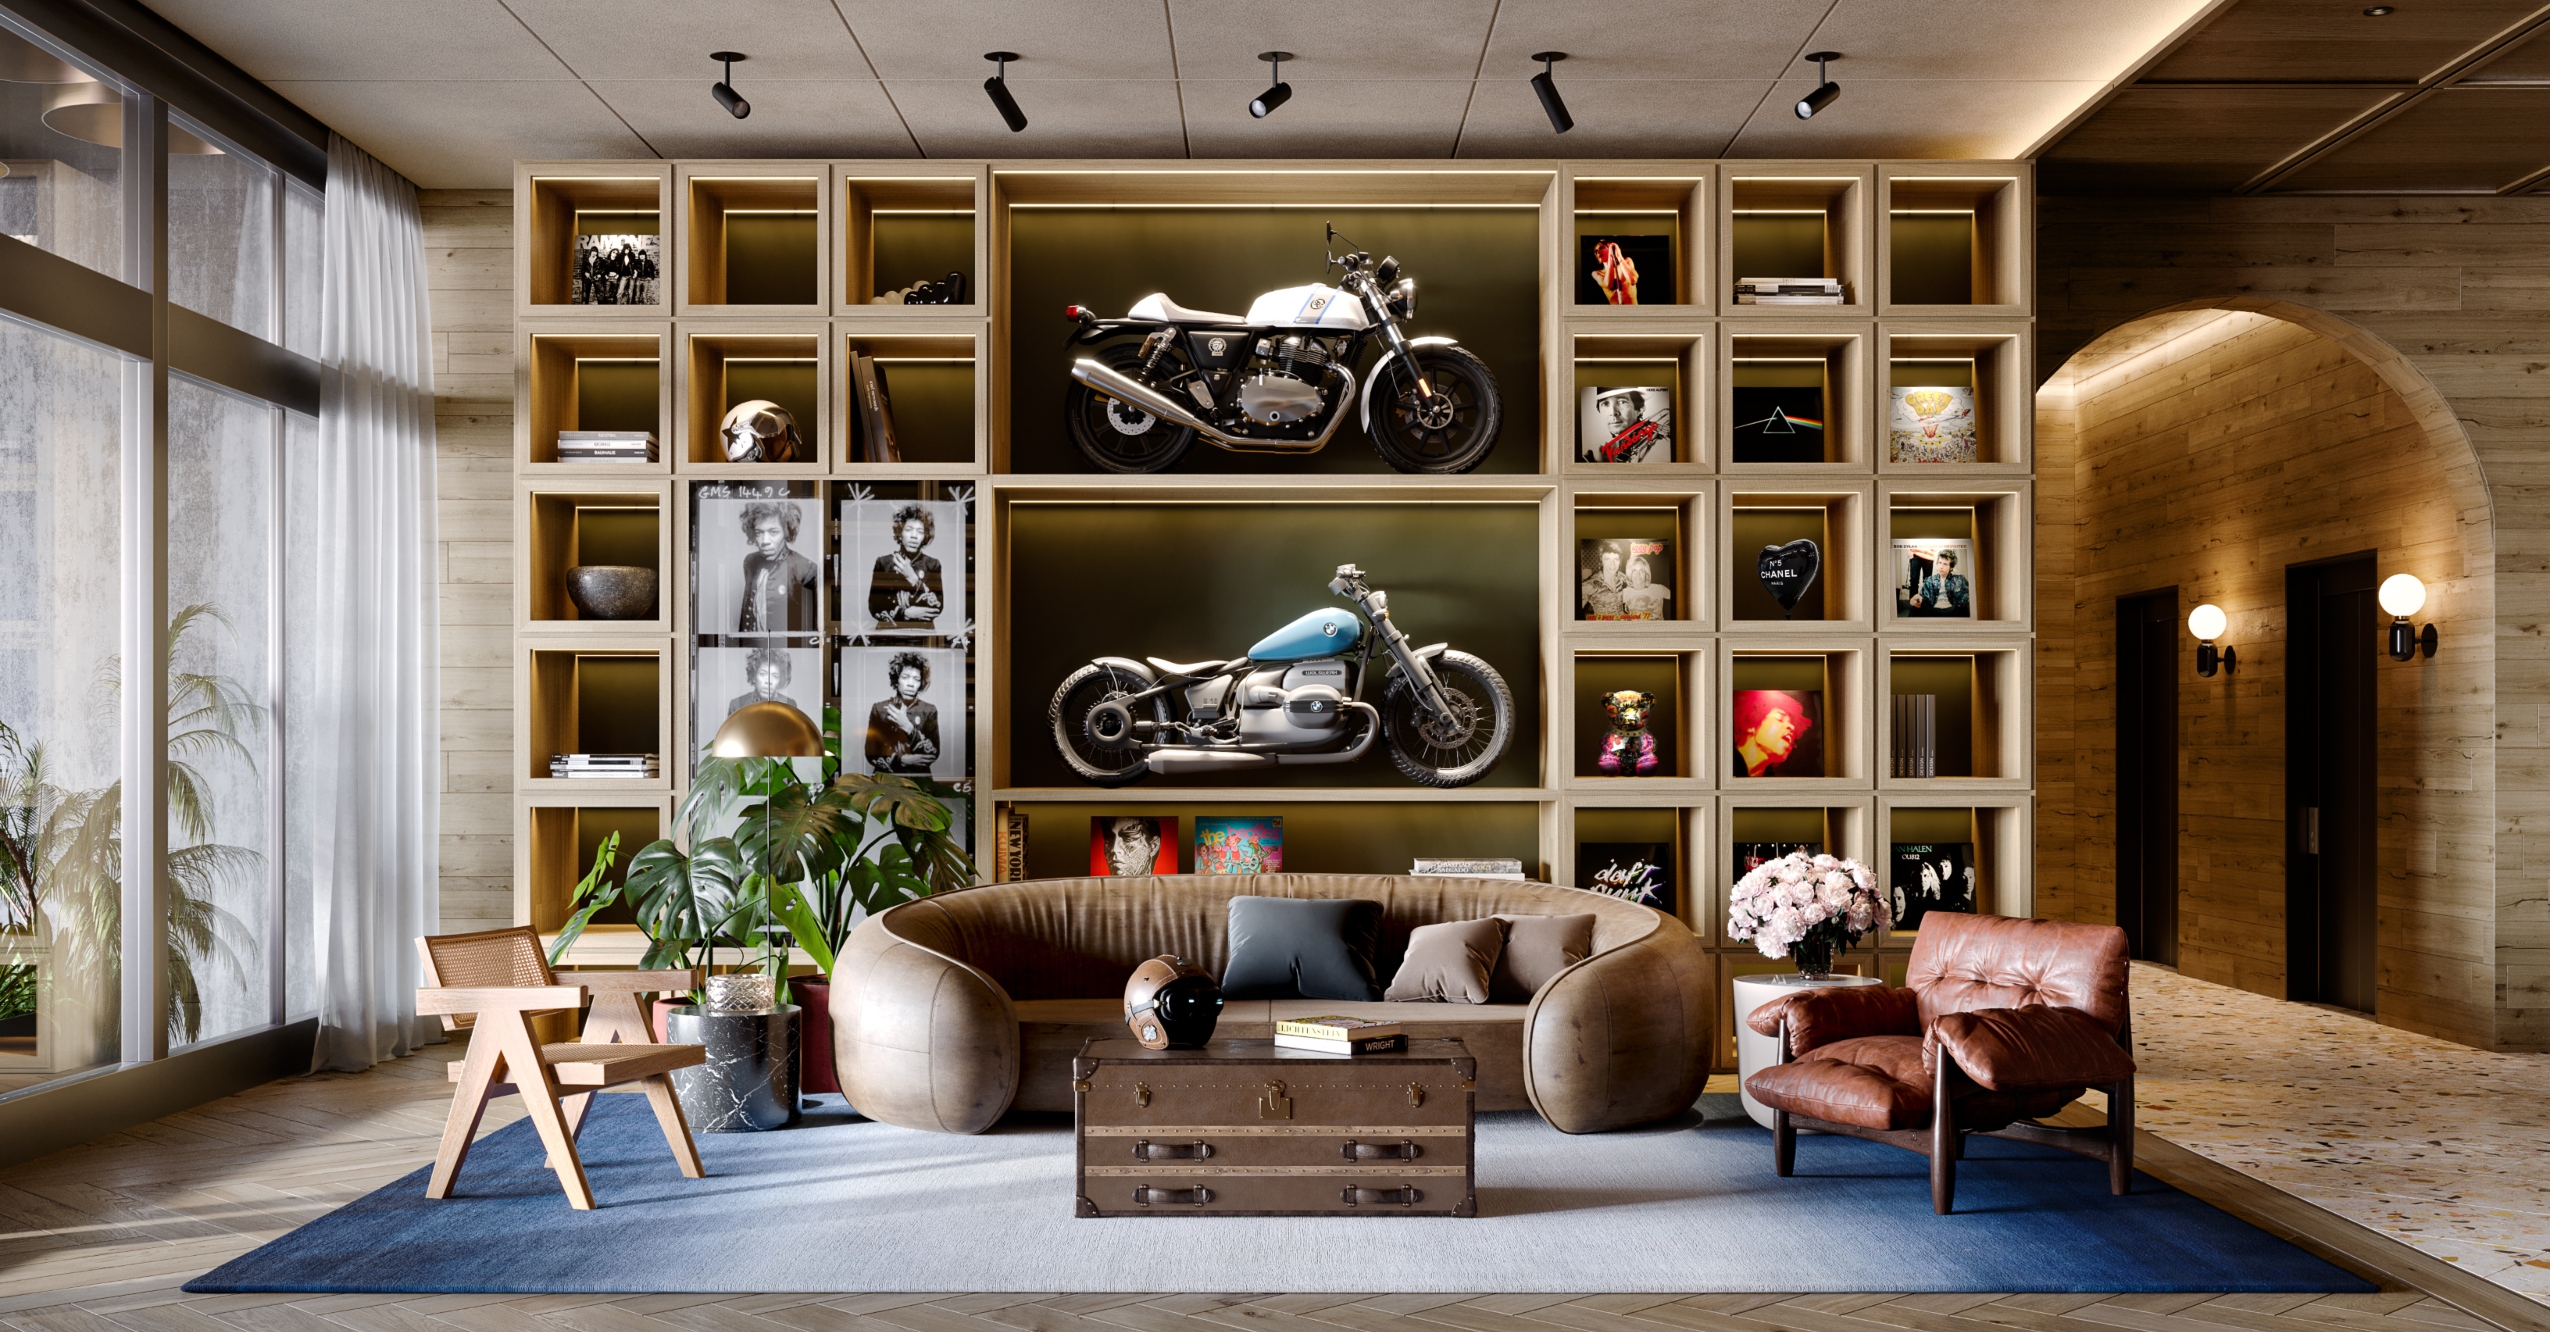 This Condo Complex Will Feature Retro Motorcycles Among Its Stylish Decor